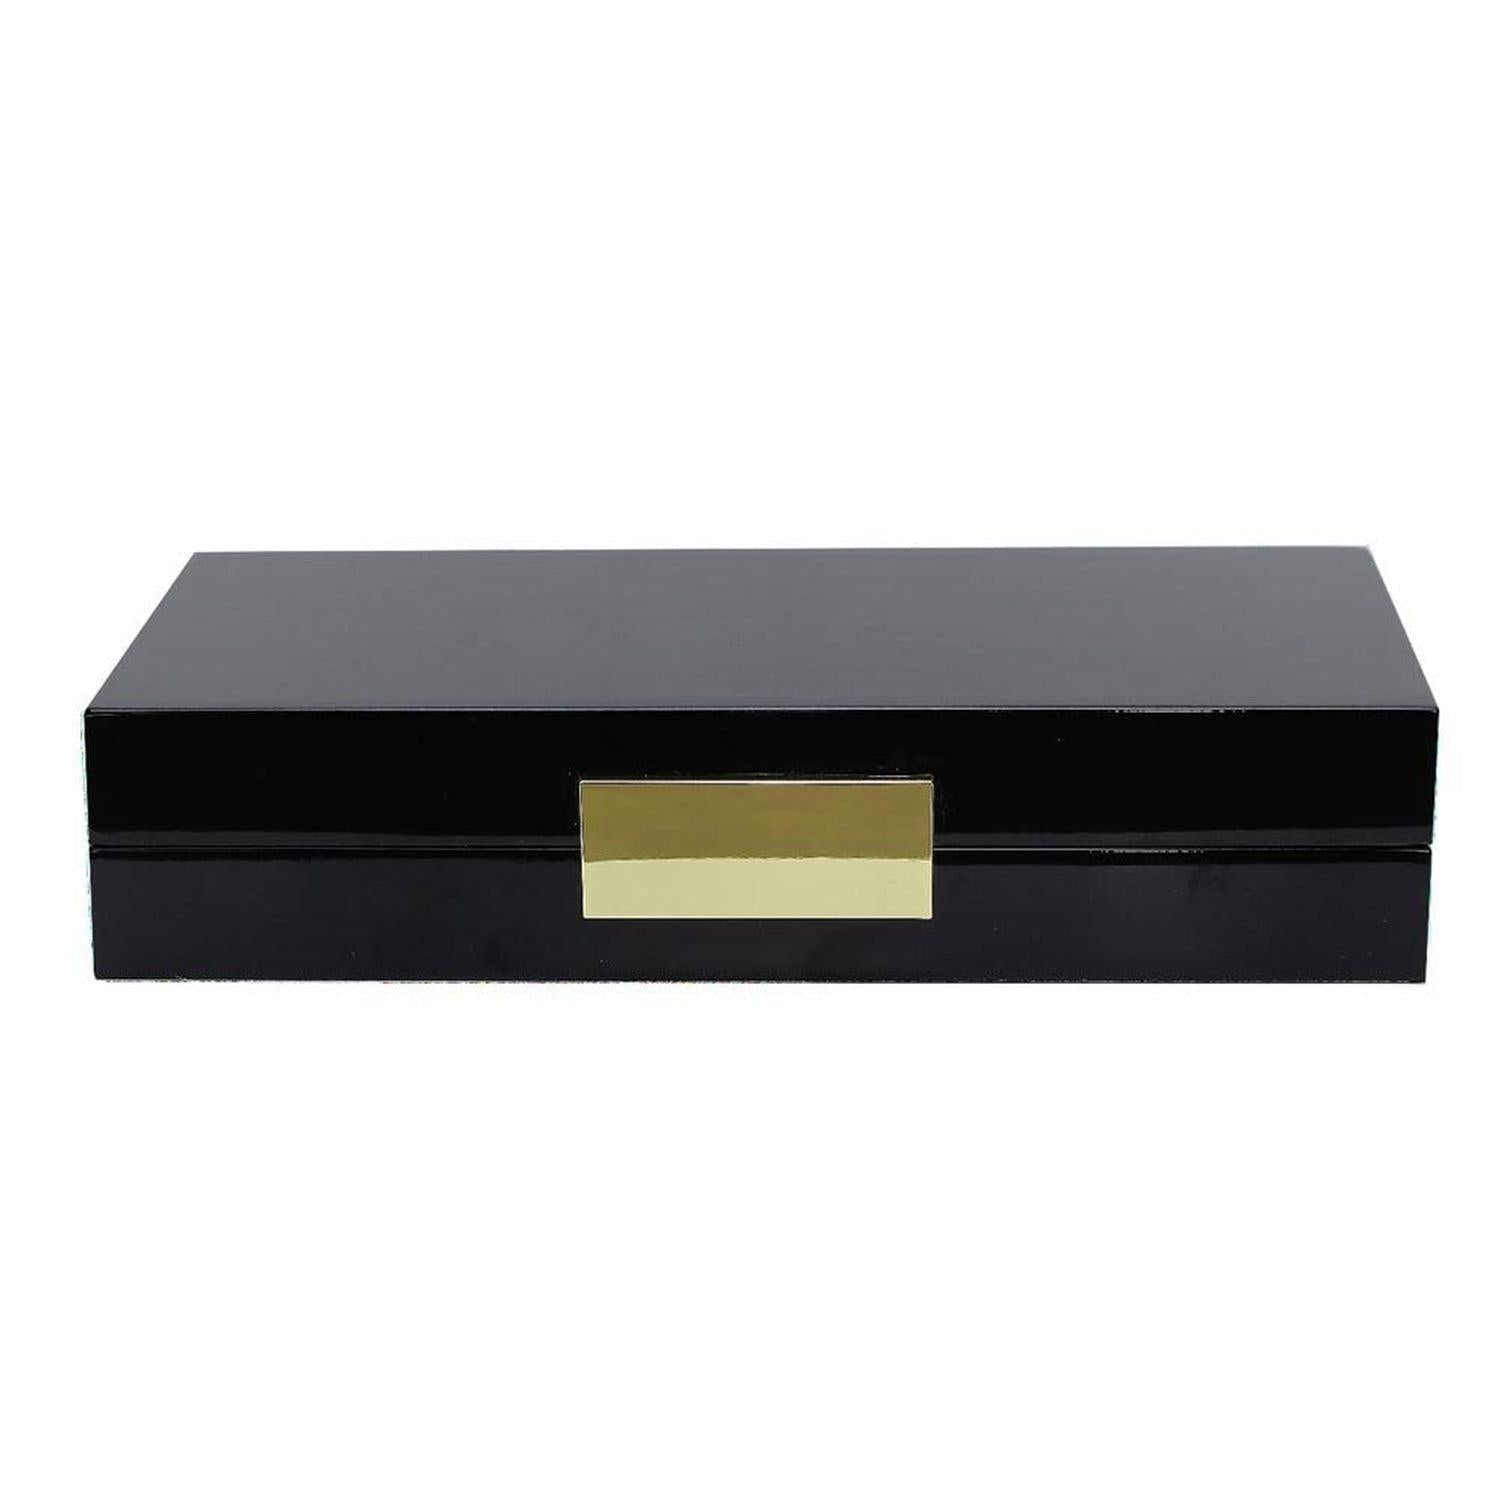 Addison Ross 5x9 Box with Black by Addison Ross